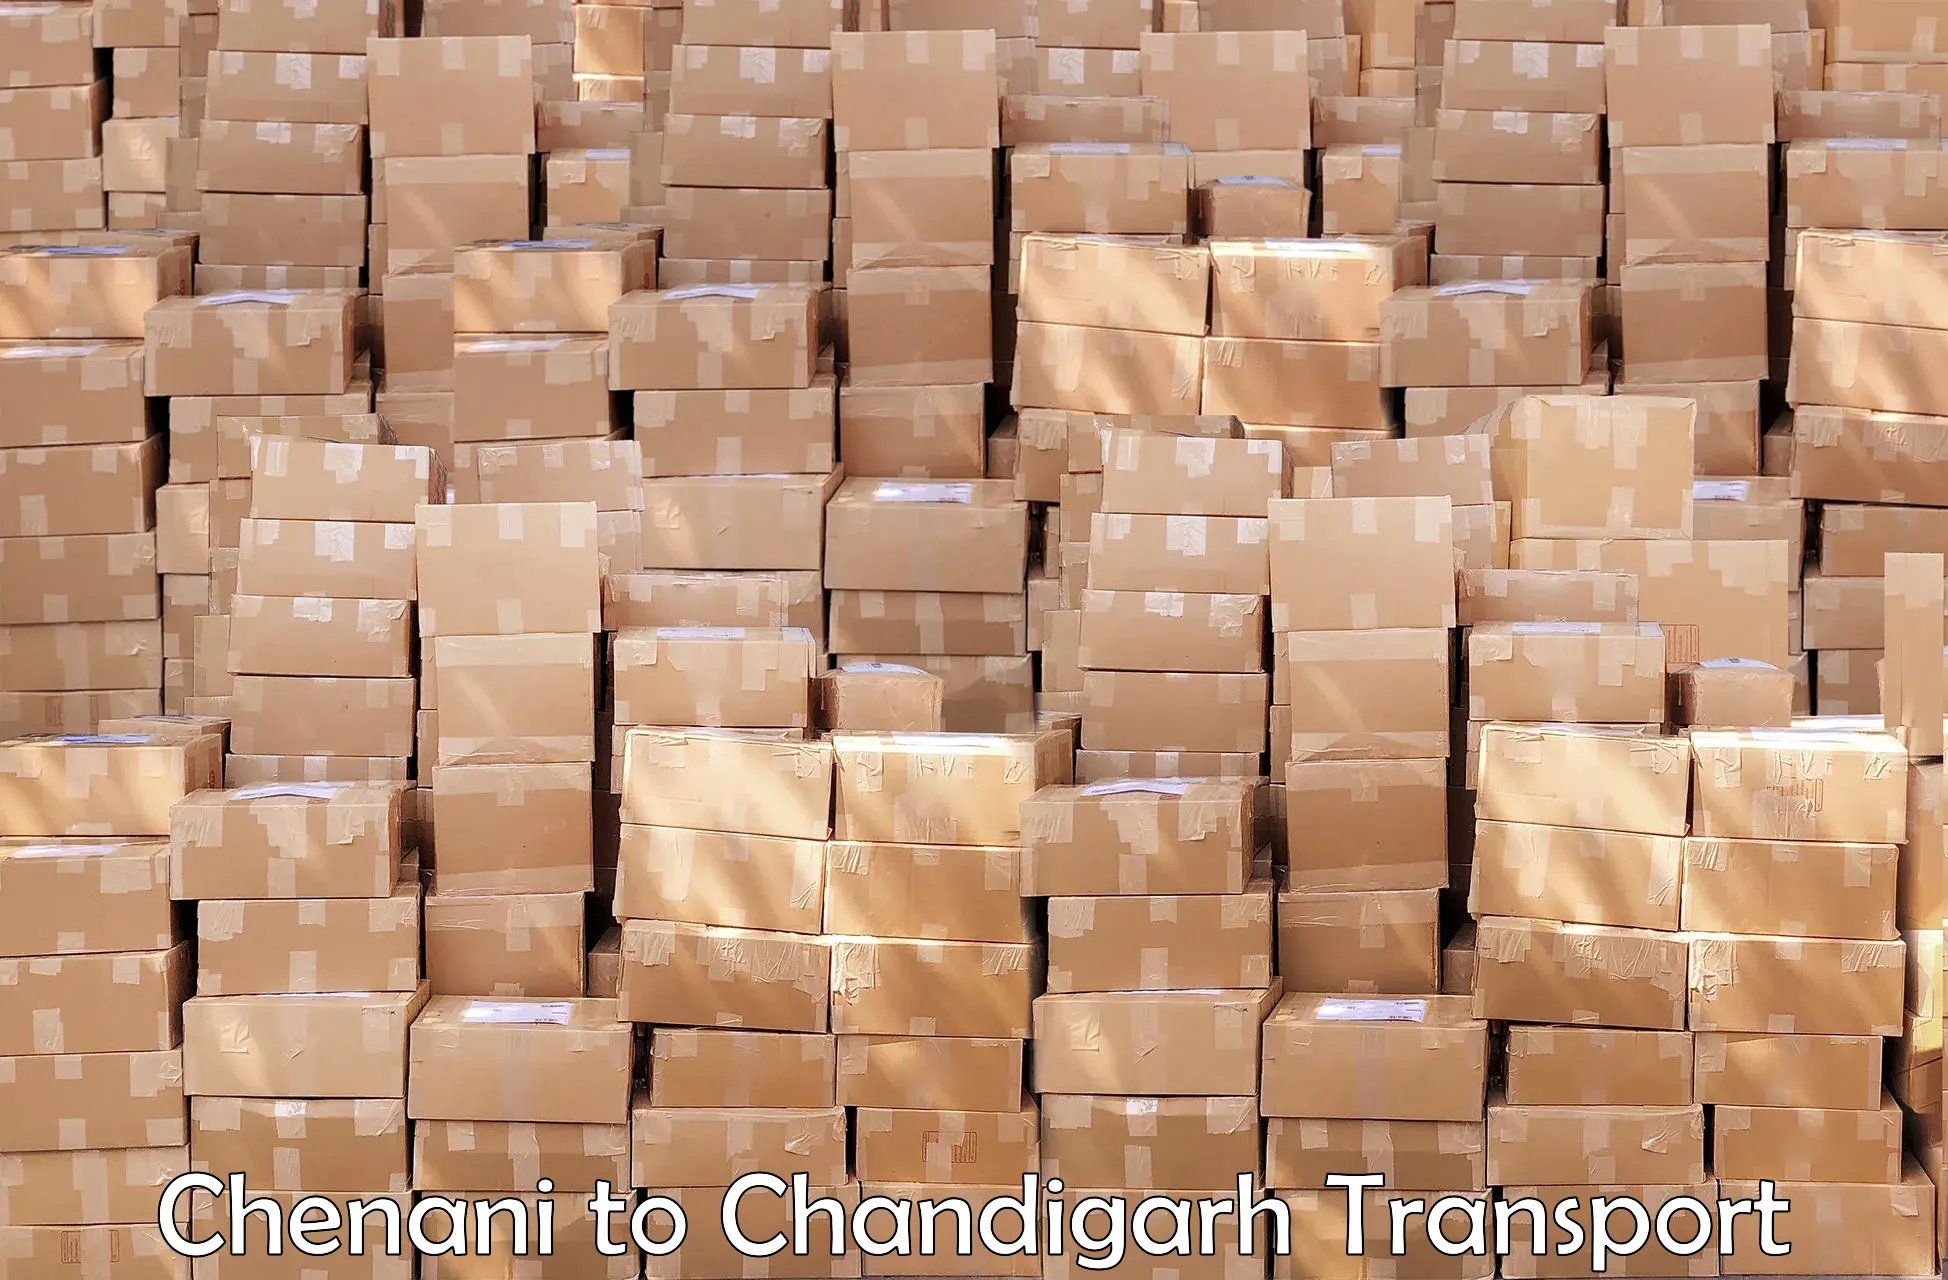 Air freight transport services Chenani to Chandigarh